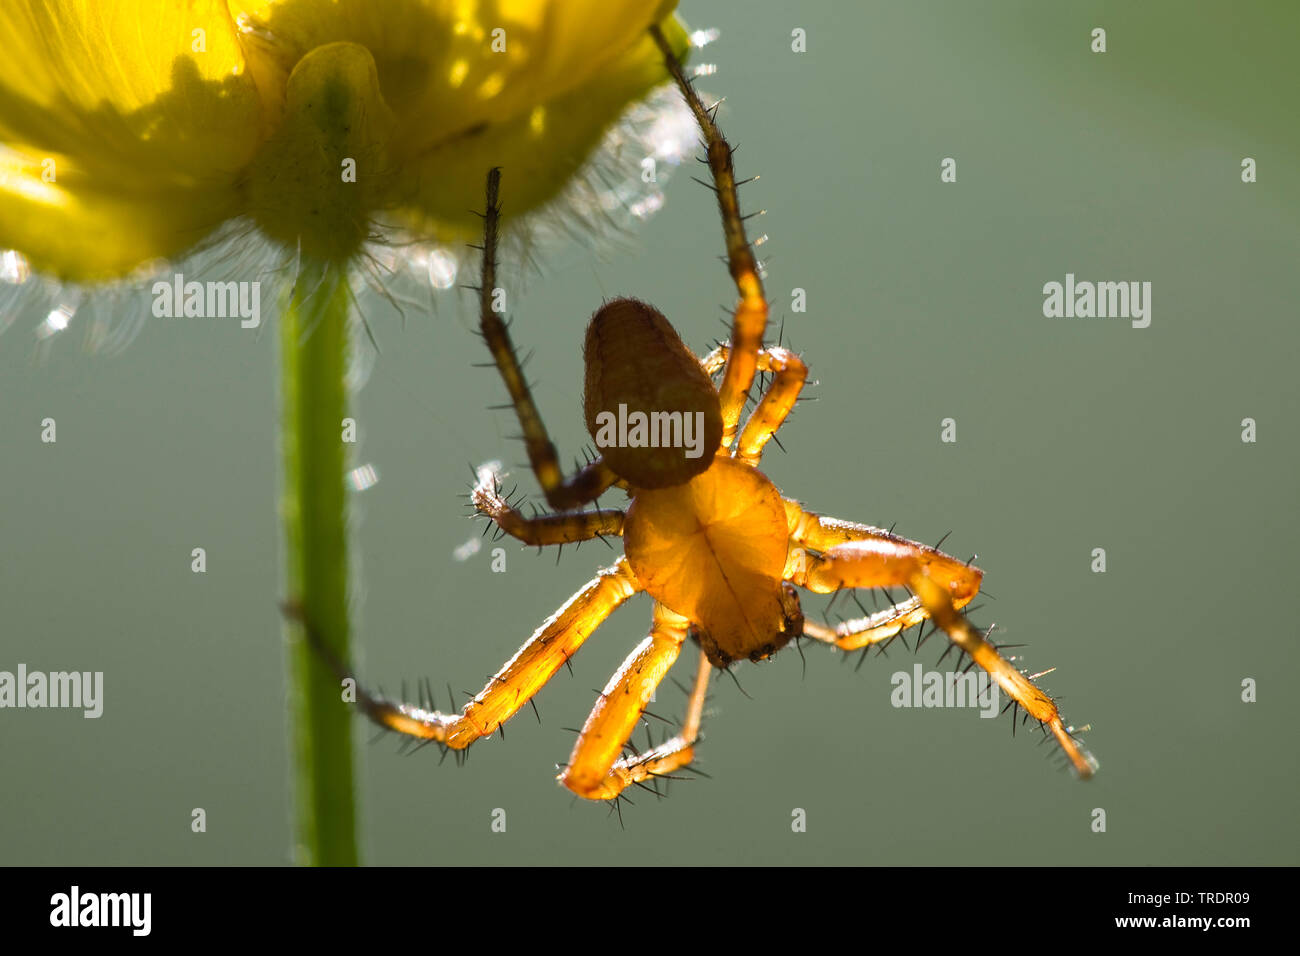 Spider on yellow flower in backlight, Hungary Stock Photo